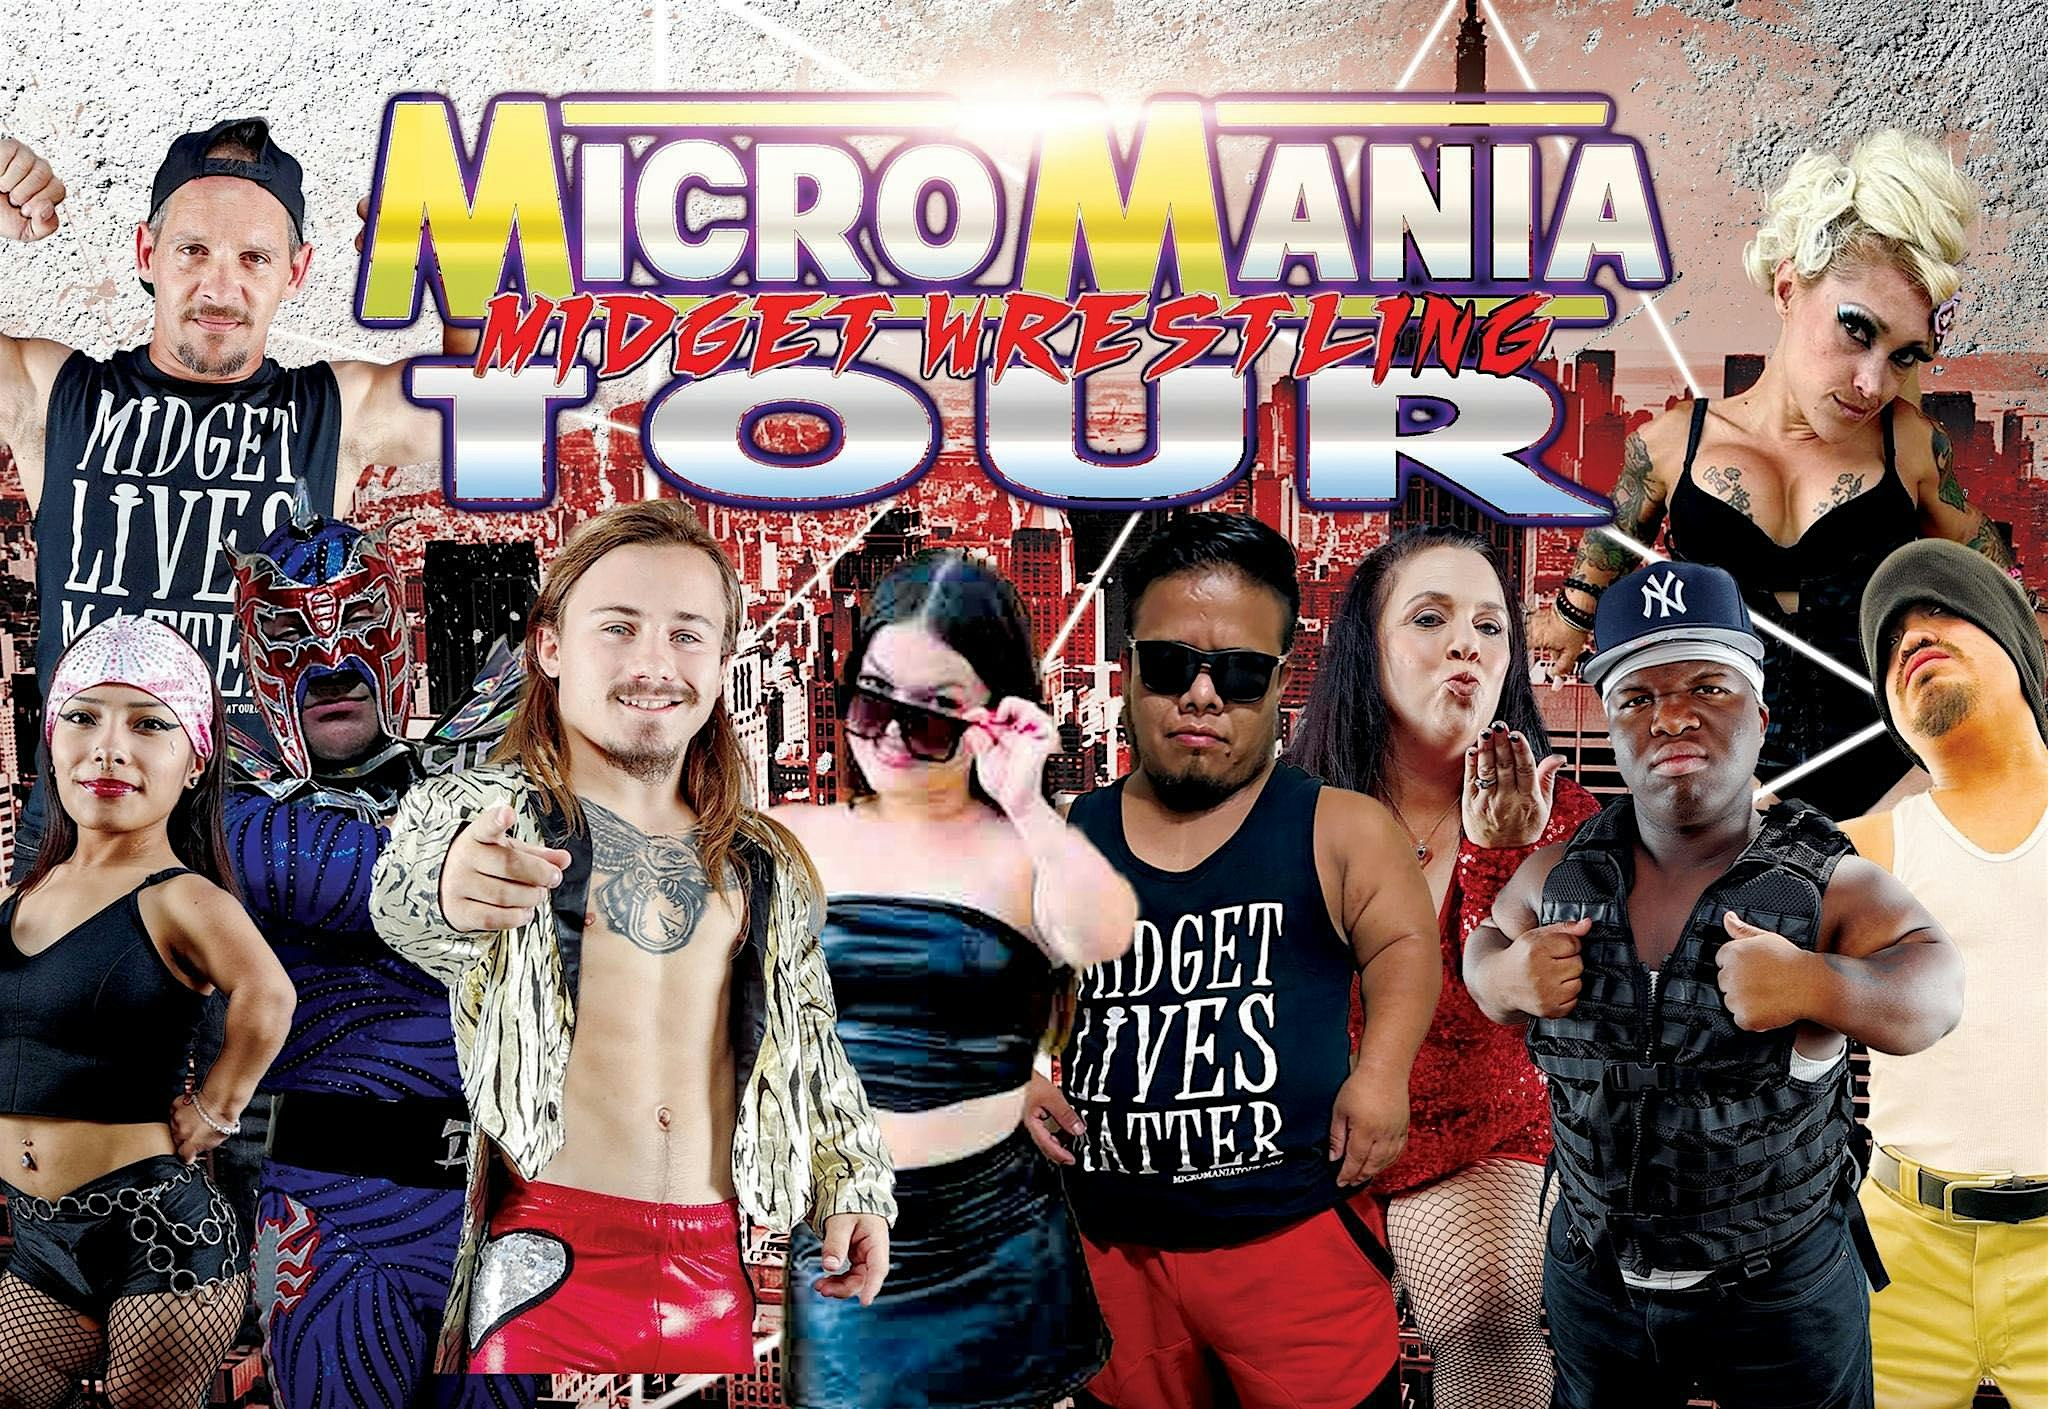 MicroMania Midget Wrestling: Mexia, TX at Marty's Place